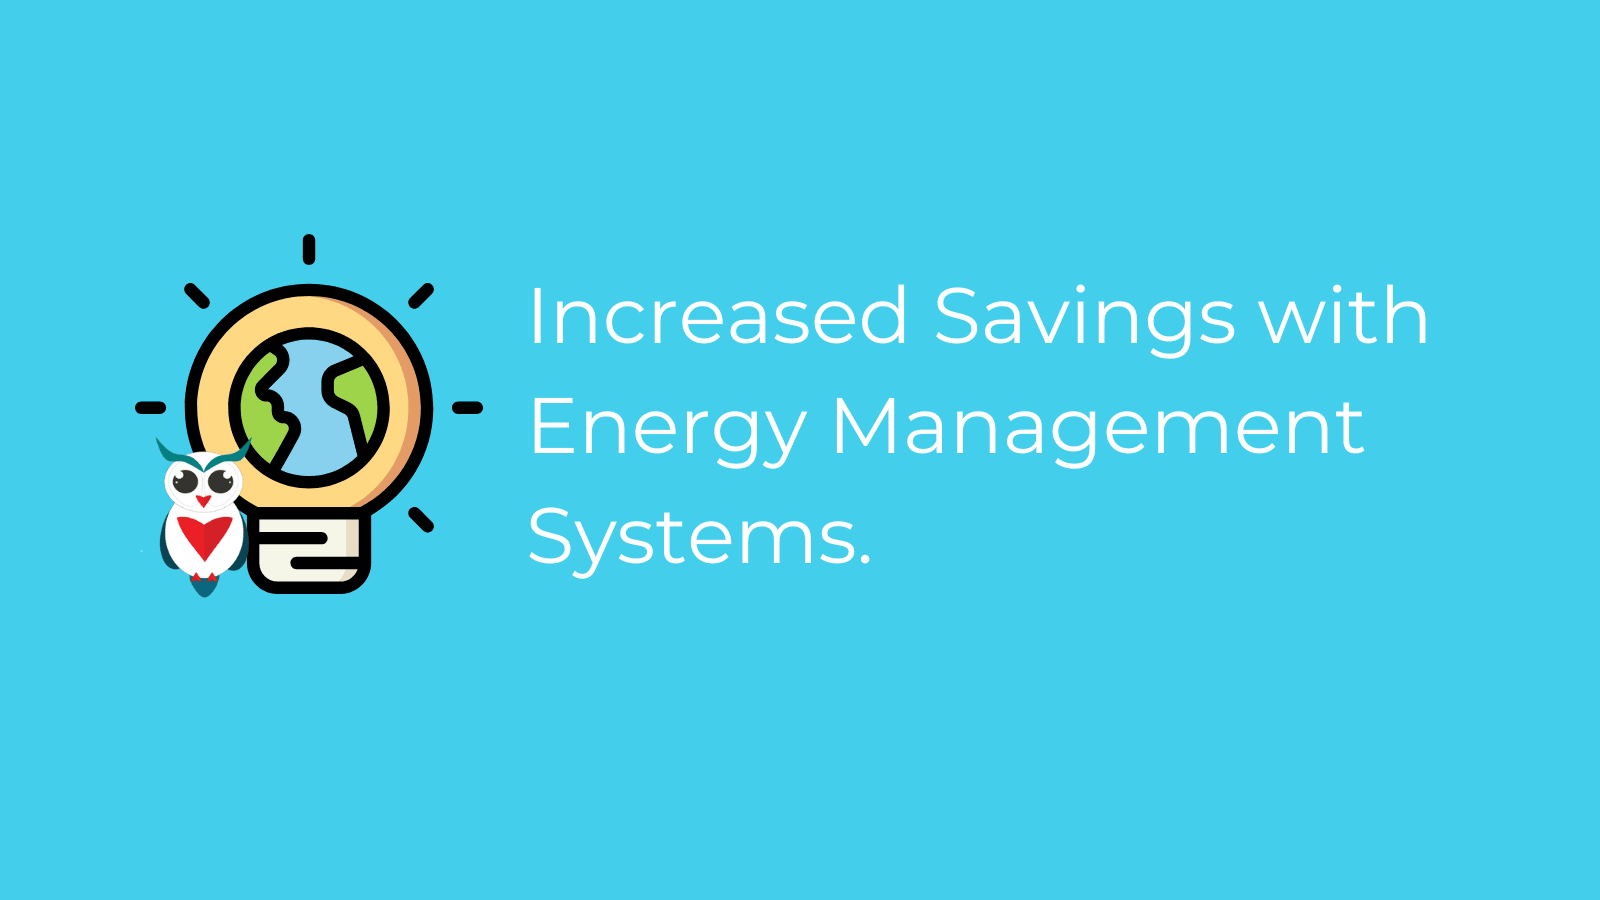 Increased Savings with Energy Management Systems: Functions, Benefits, and Industry Trends